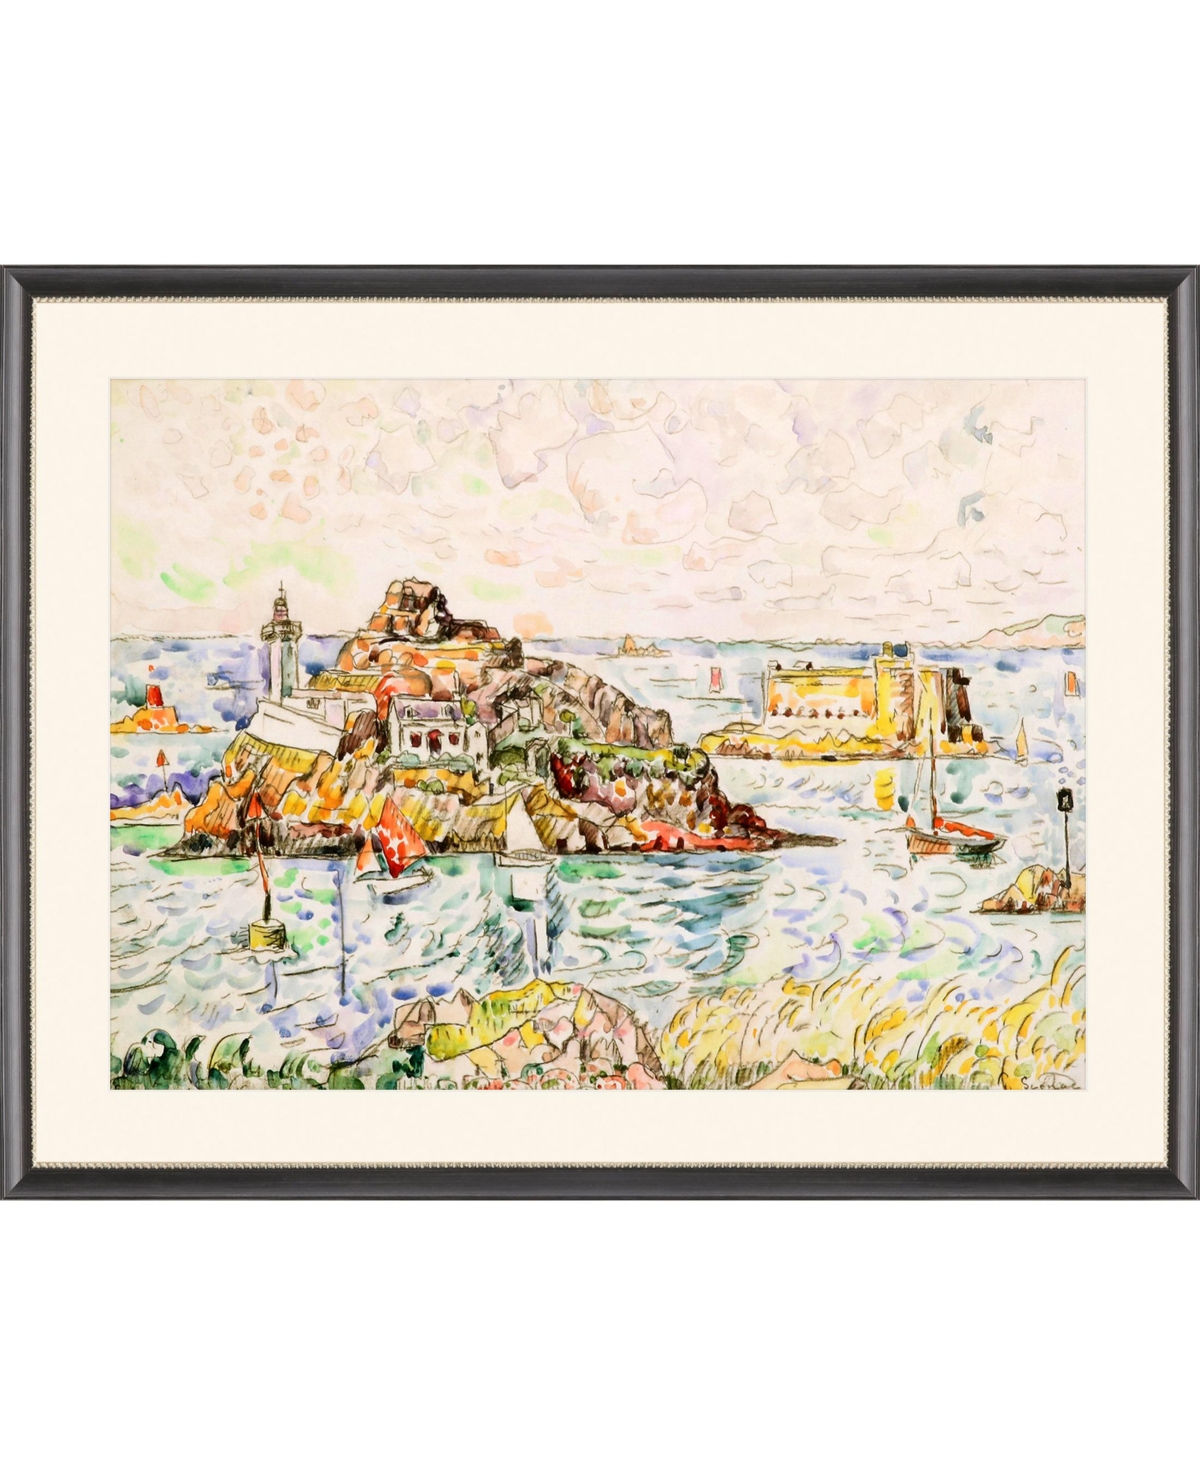 Paragon Picture Gallery Morlaix Framed Art In Multi